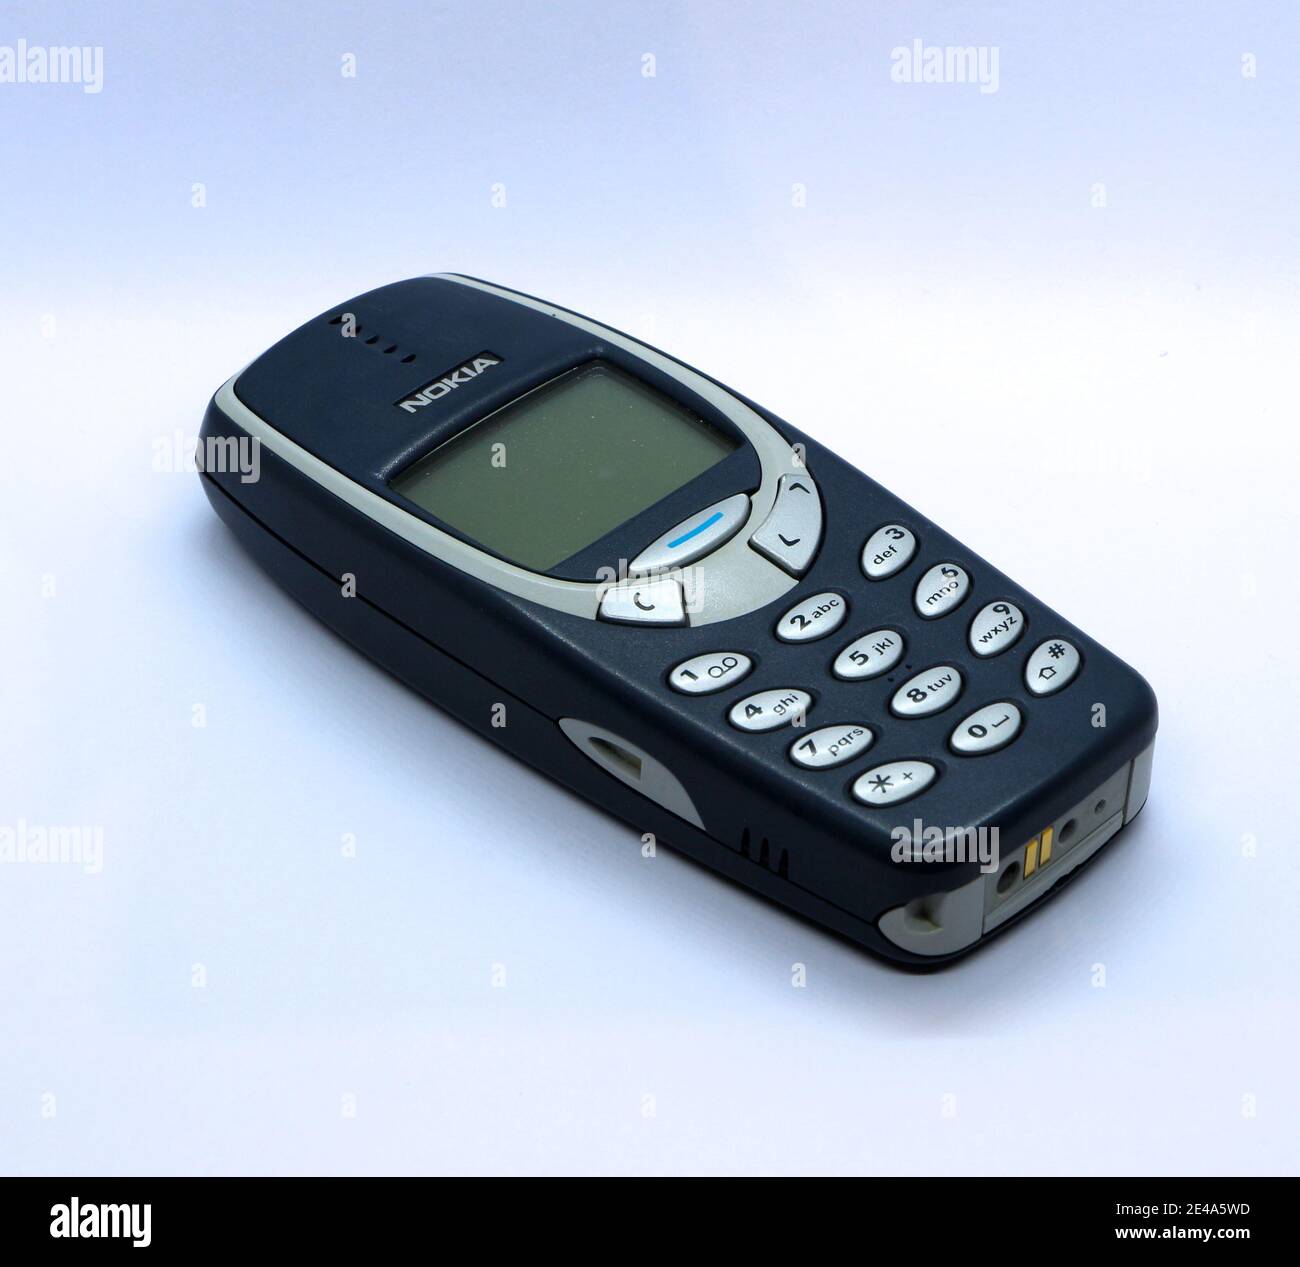 Photo of a Nokia 3310 classic mobile phone in blue announced 1 ...